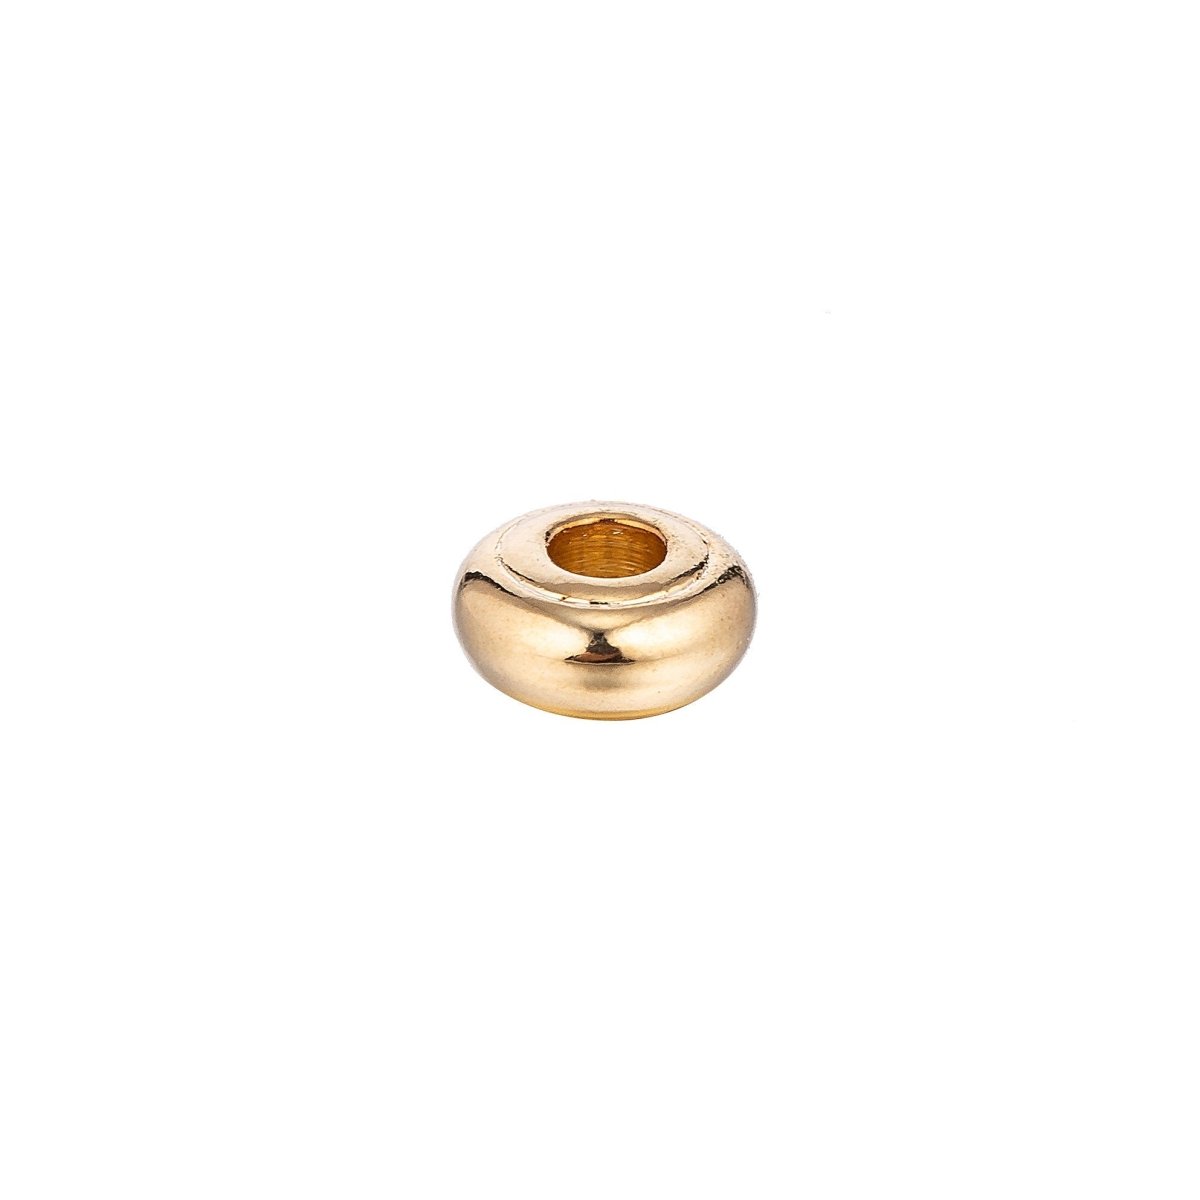 18K Gold Filled Tiny Small Donut Ring Shaped Spacer Bead Findings Connector | B-042 - DLUXCA